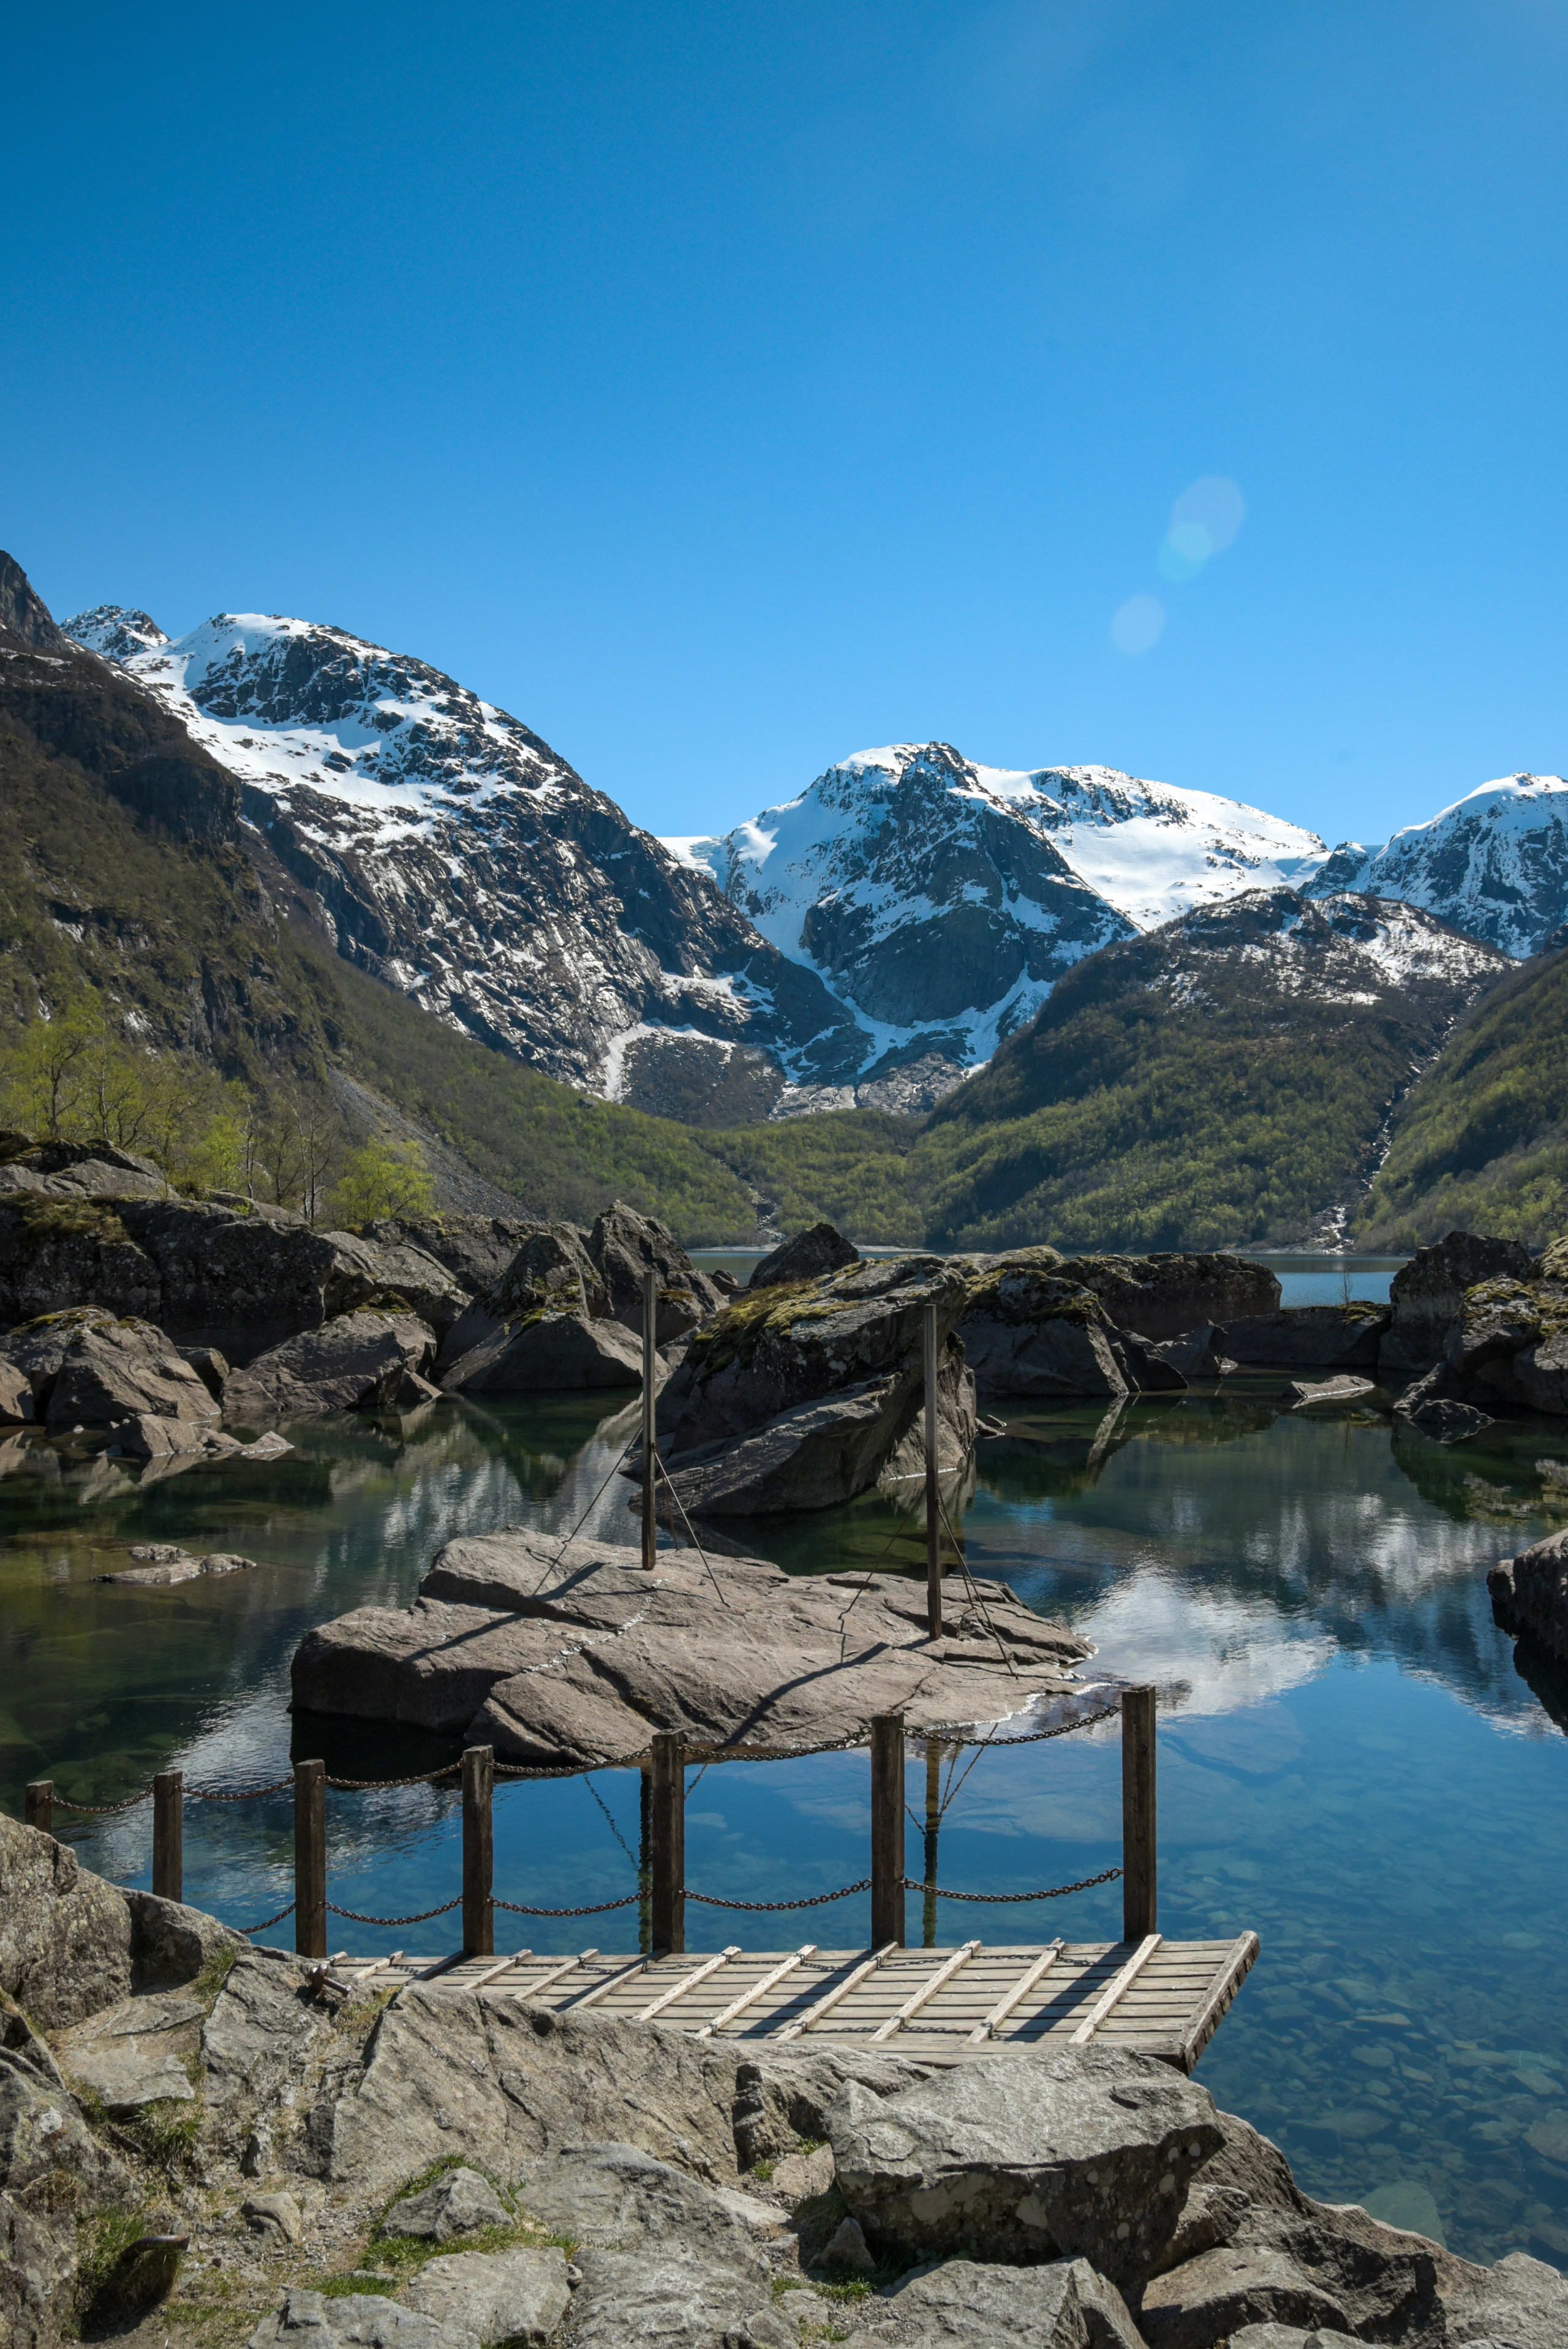 The dock used to transport ice from Folgefonna glacier to Europe